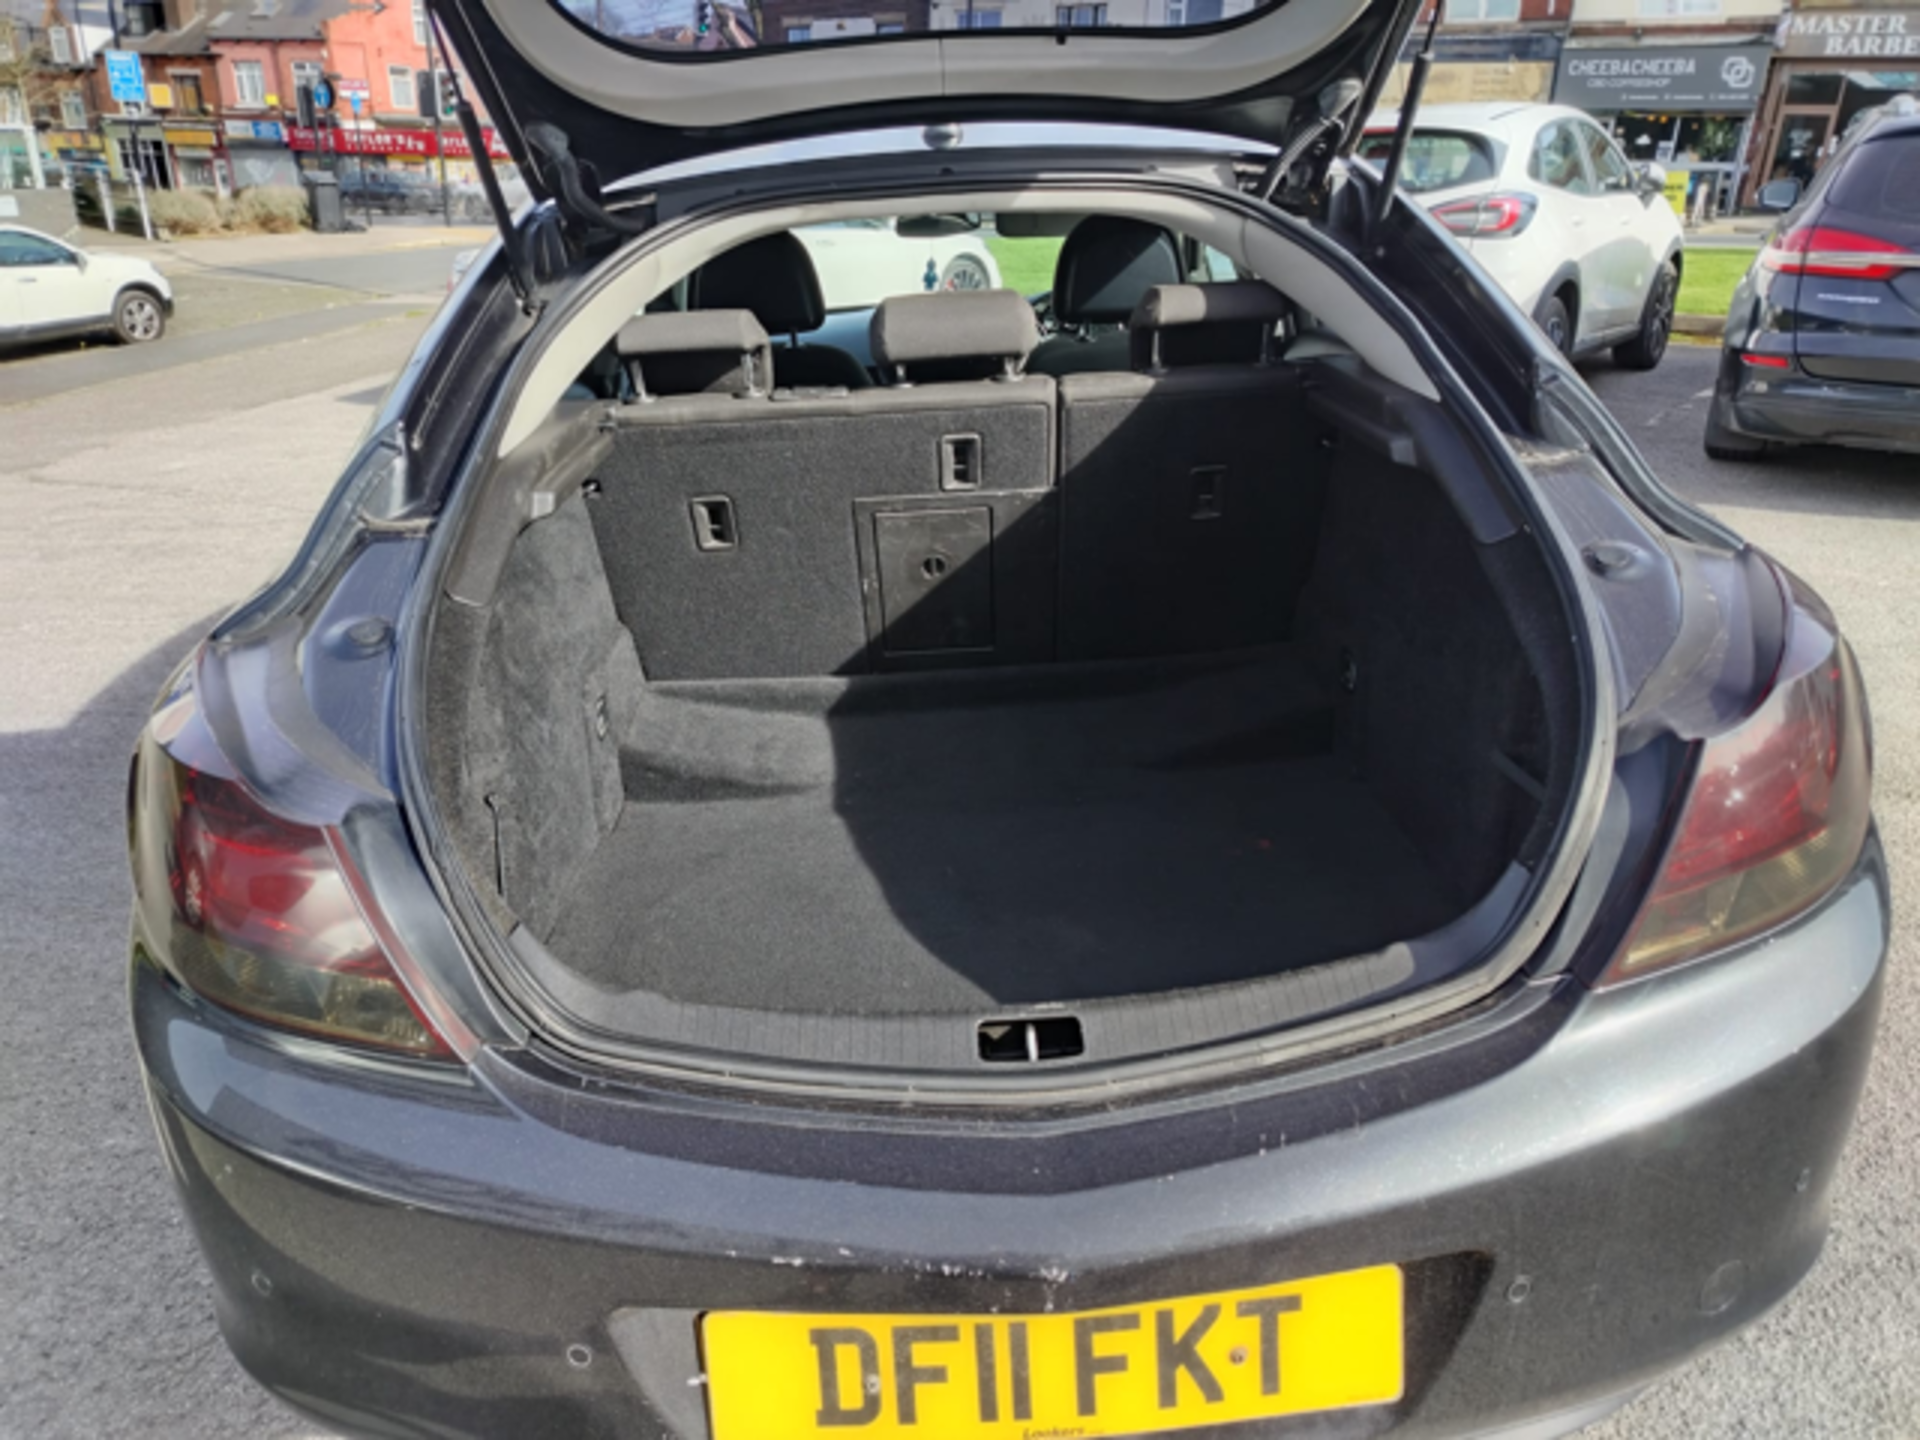 VAUXHALL INSIGNIA DF11 FKT - Image 7 of 11